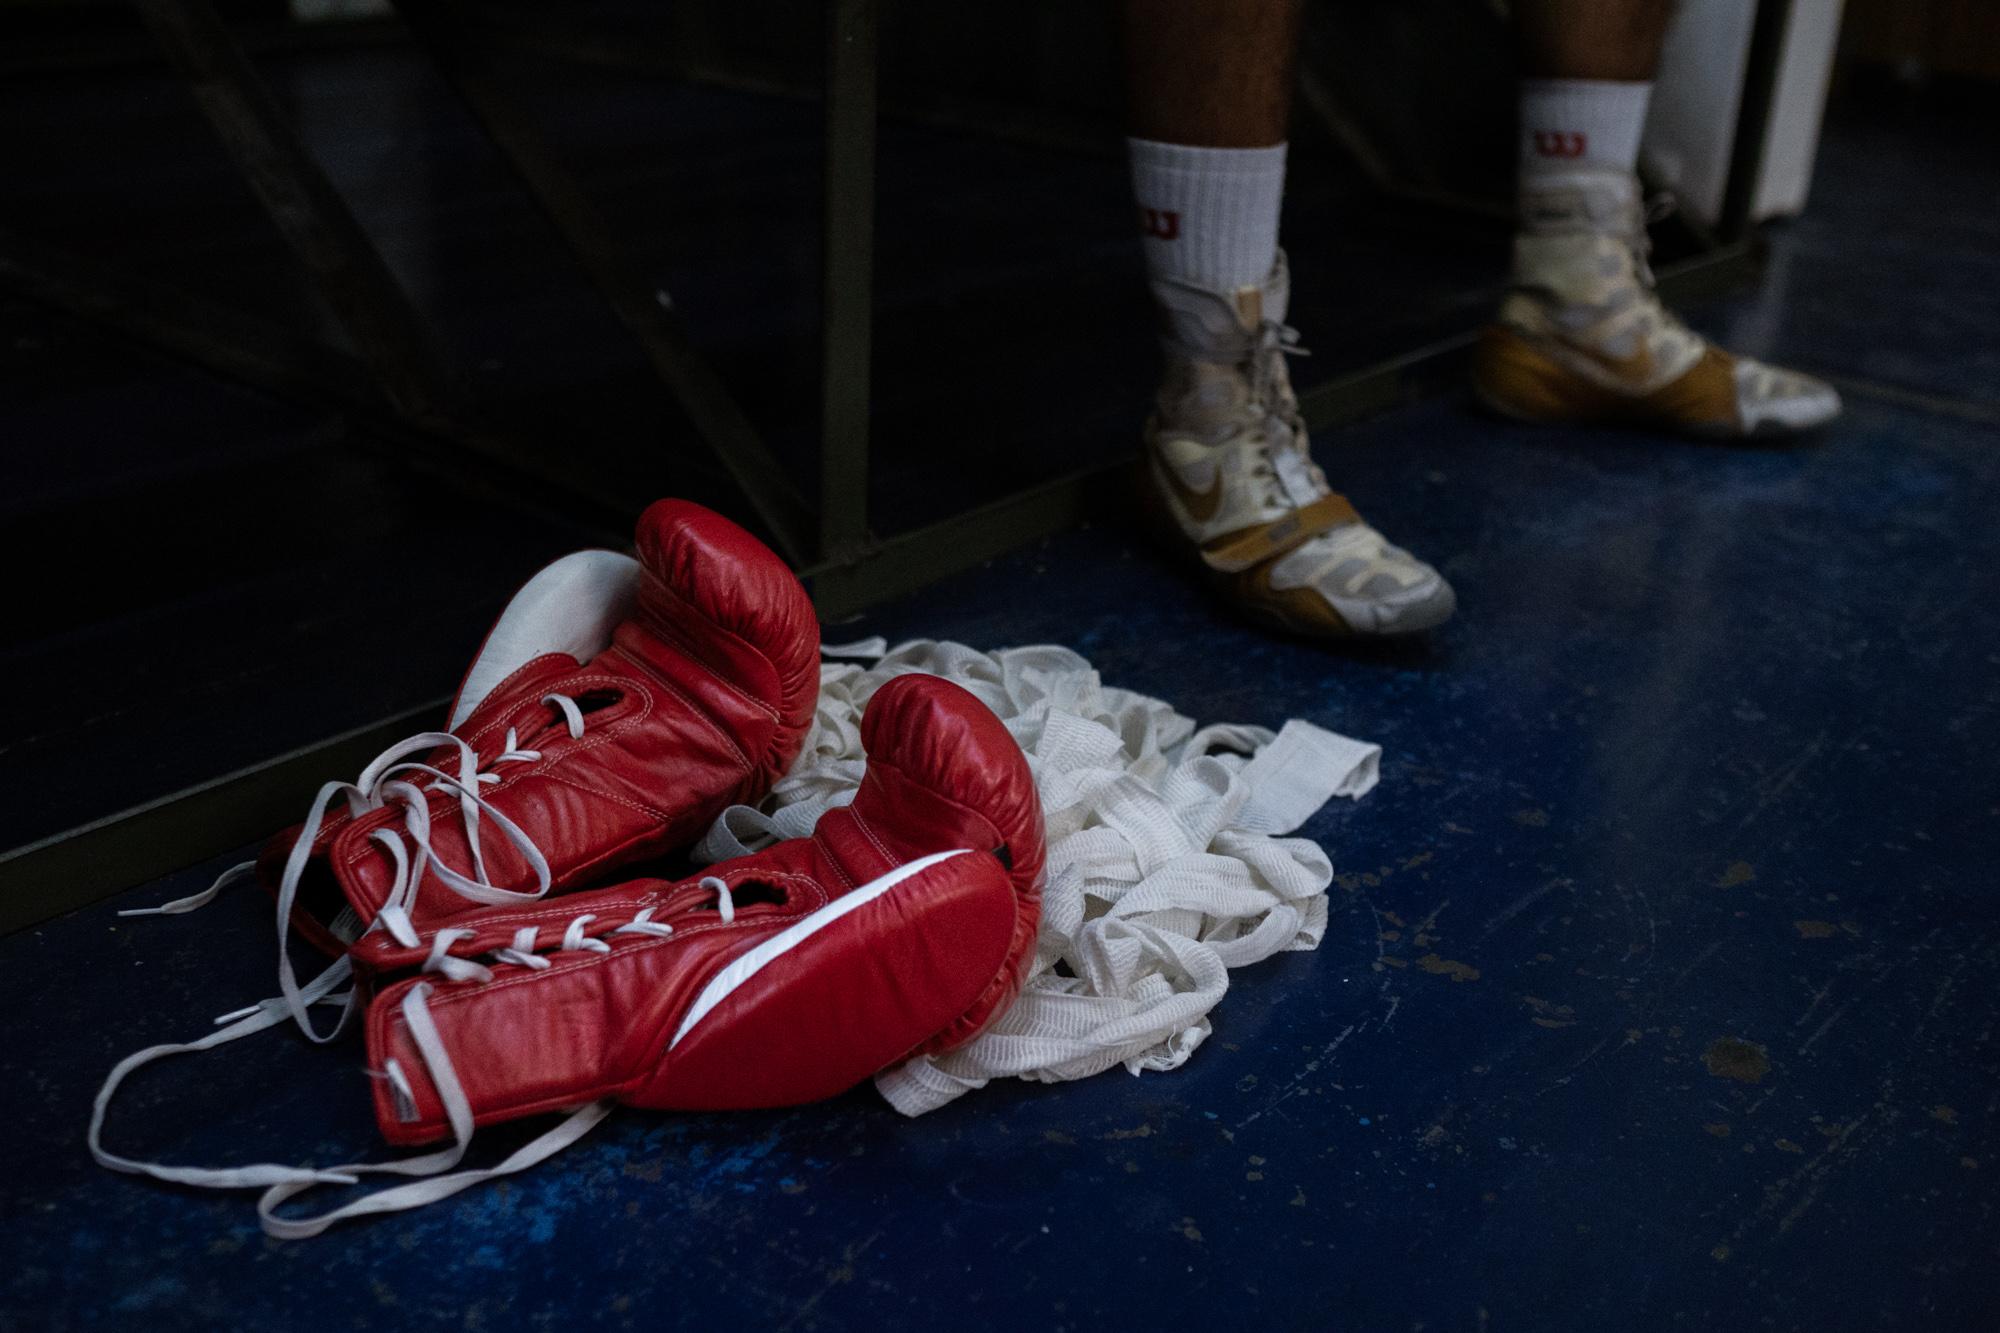 Homecoming - ESPN - Gloves and bandages after a training.